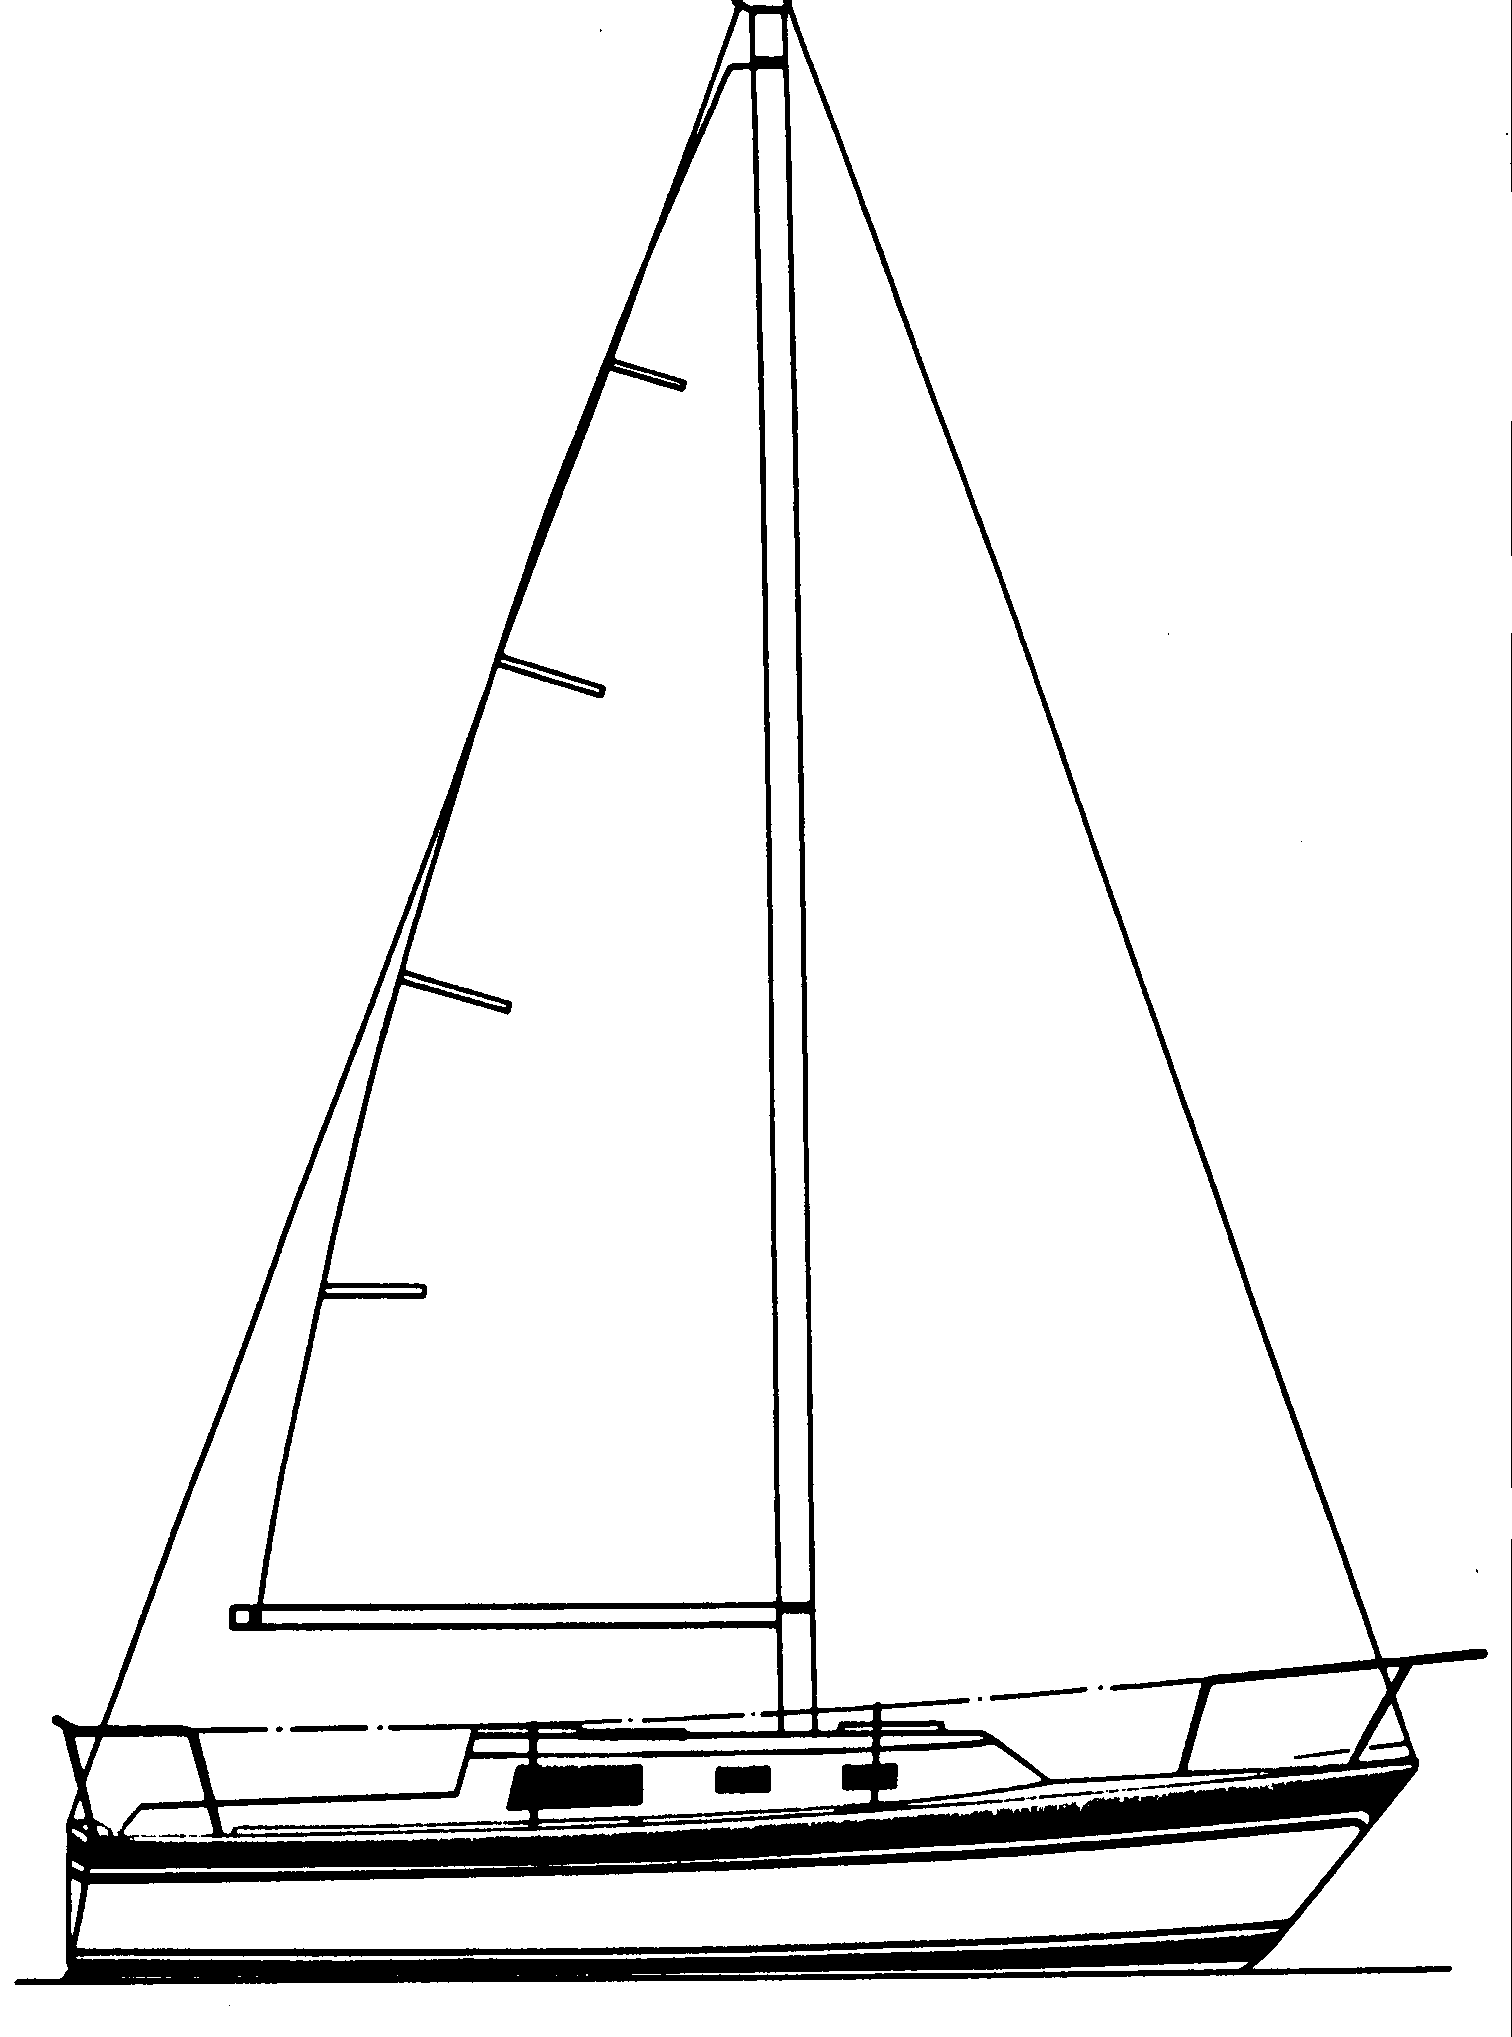 Sailboat Drawing - ClipArt Best